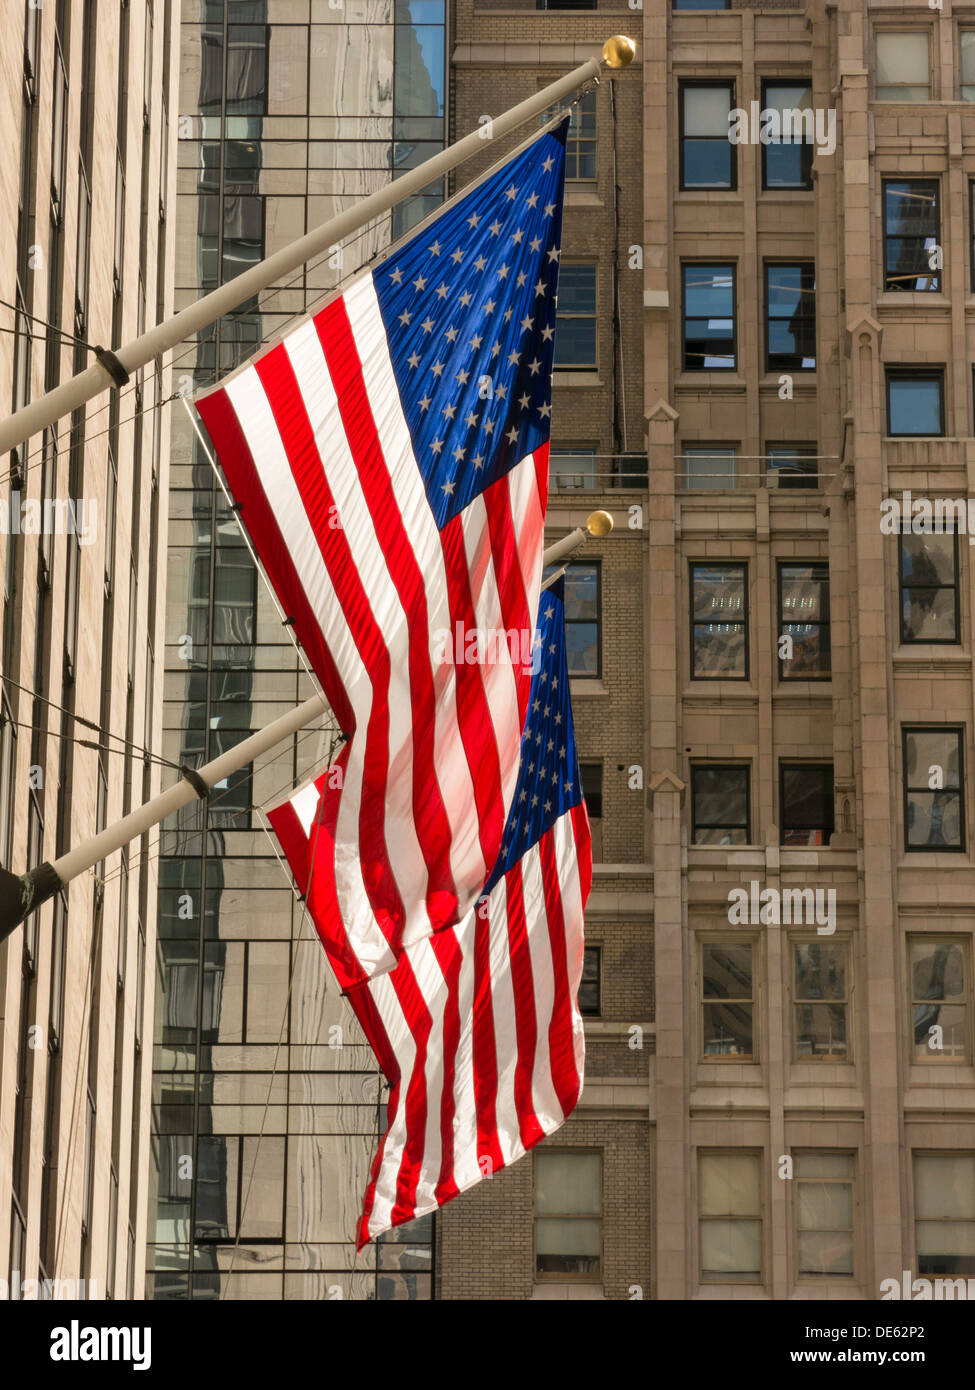 American Flags on Display, Rockefeller Center in New York City Stock Photo